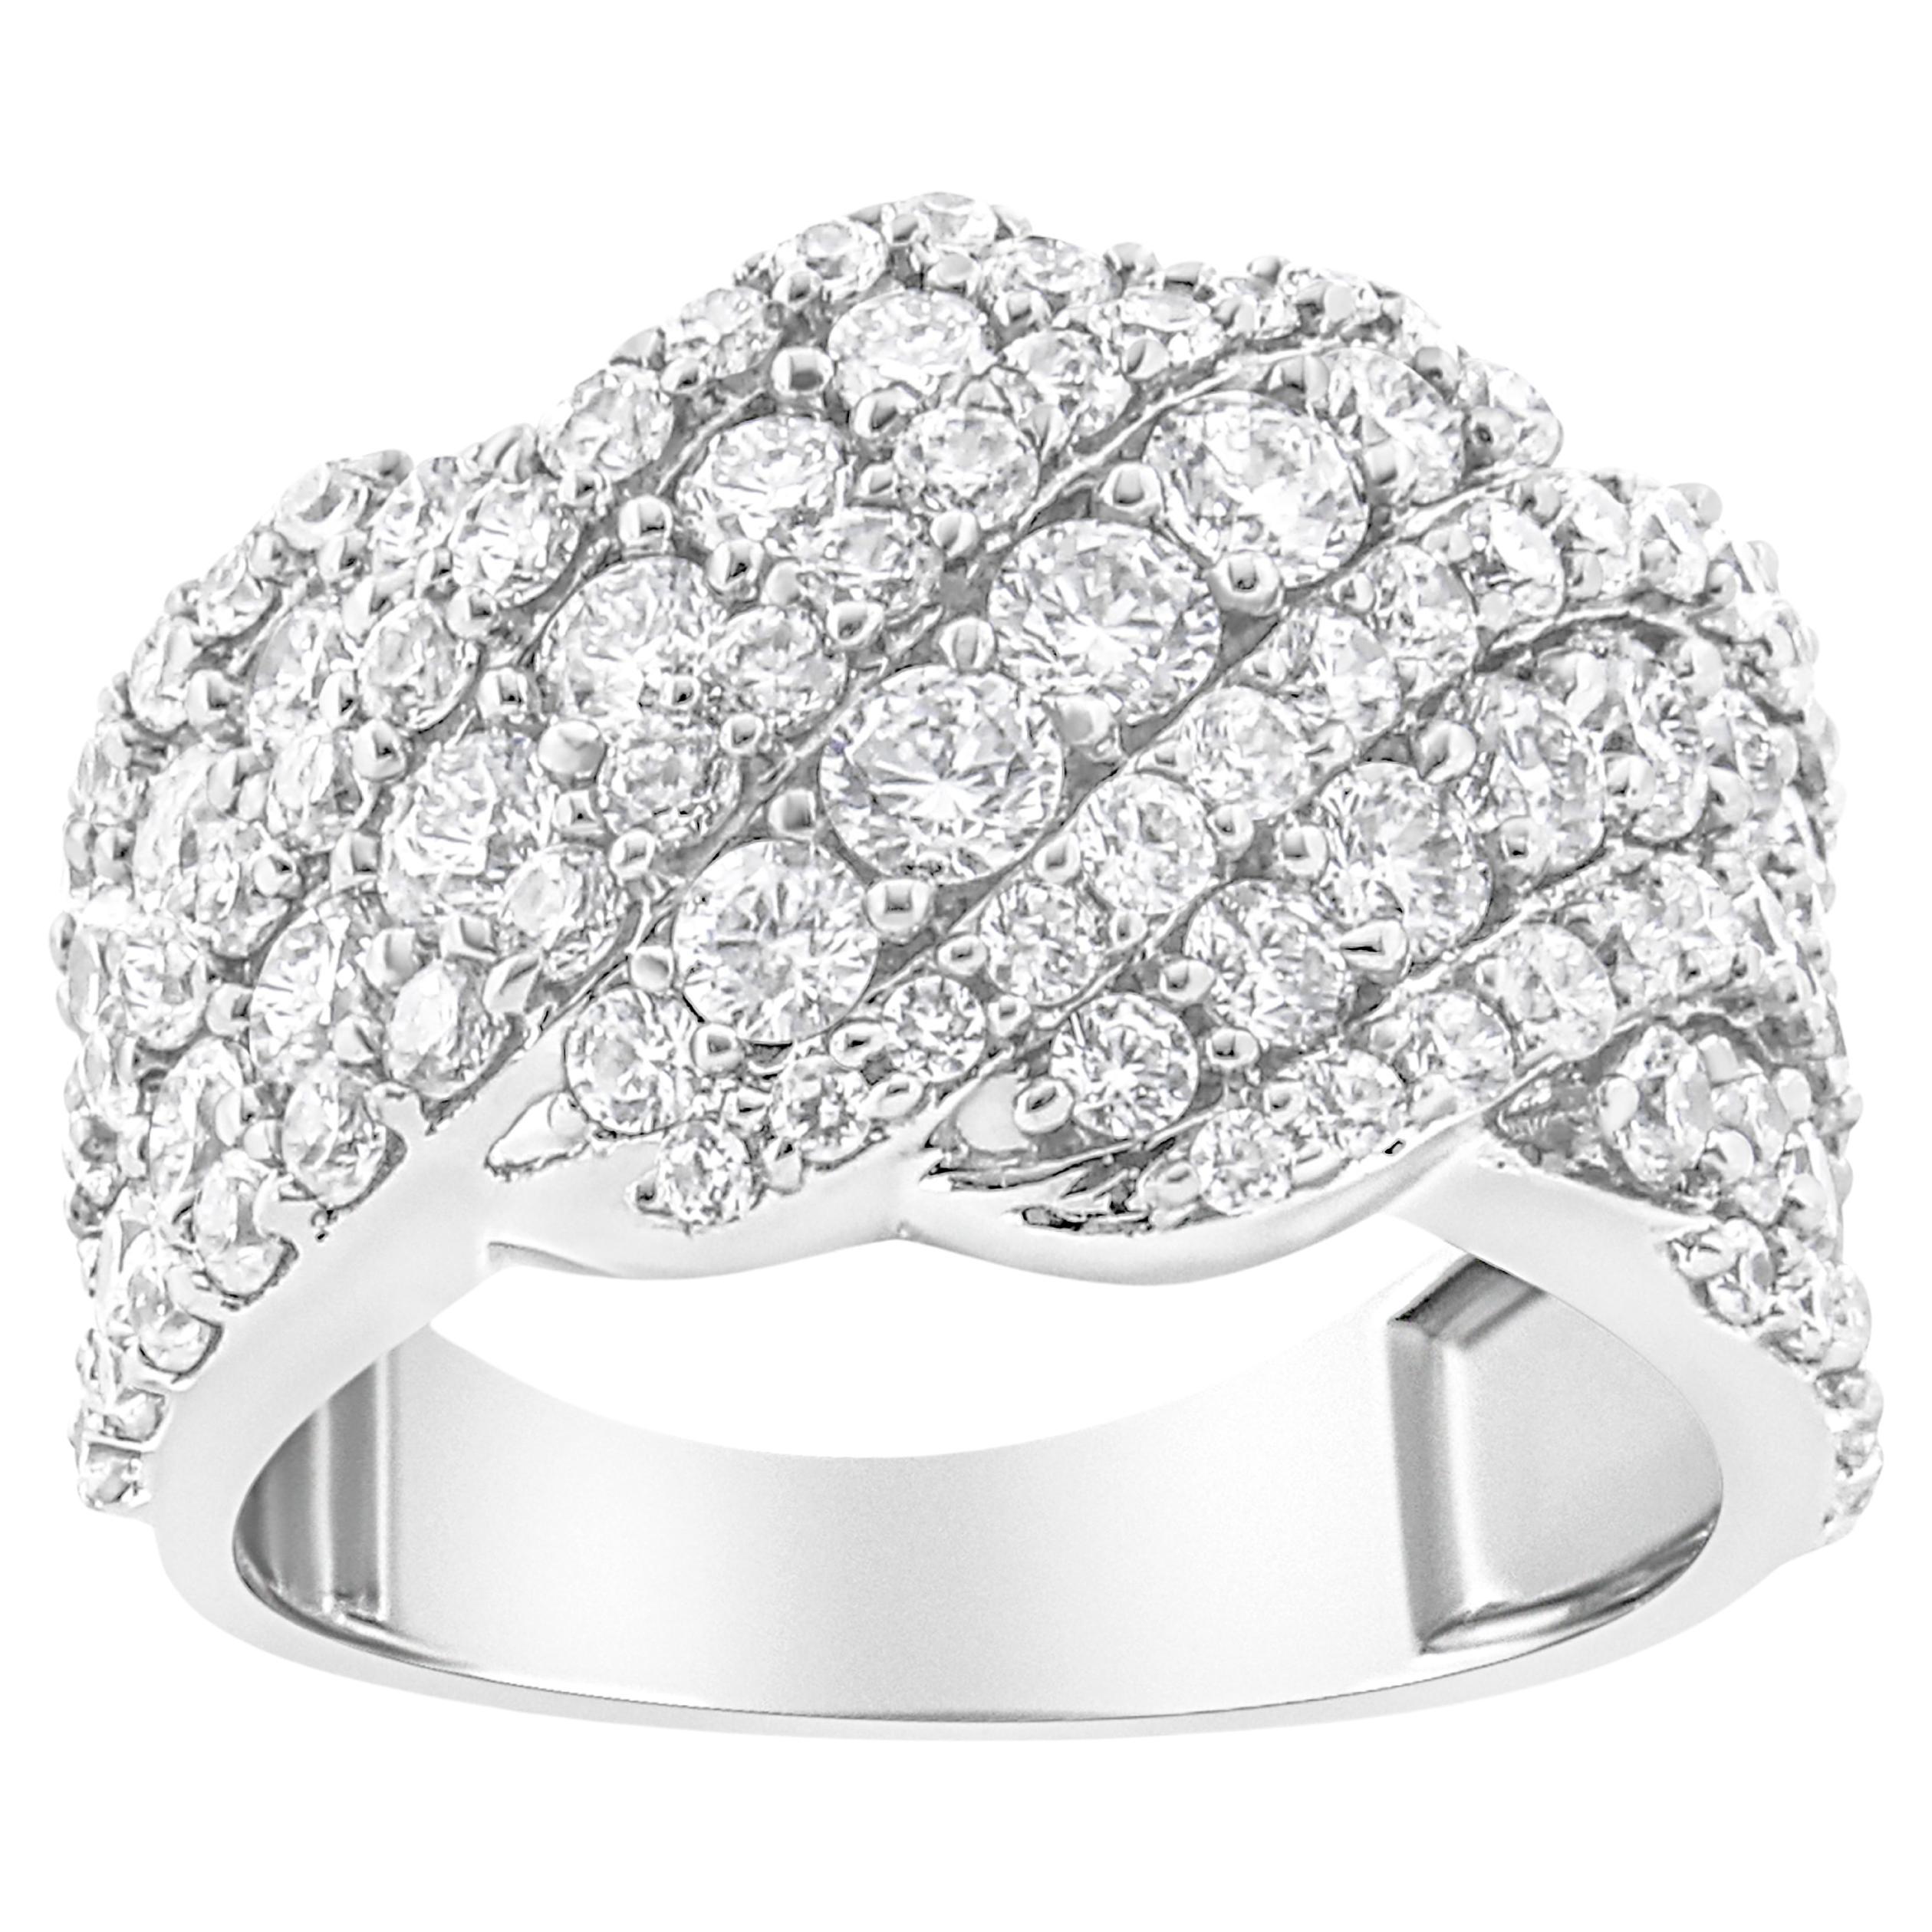 For Sale:  10K White Gold 3.00 Carat Diamond Multi Row Cluster Band Ring